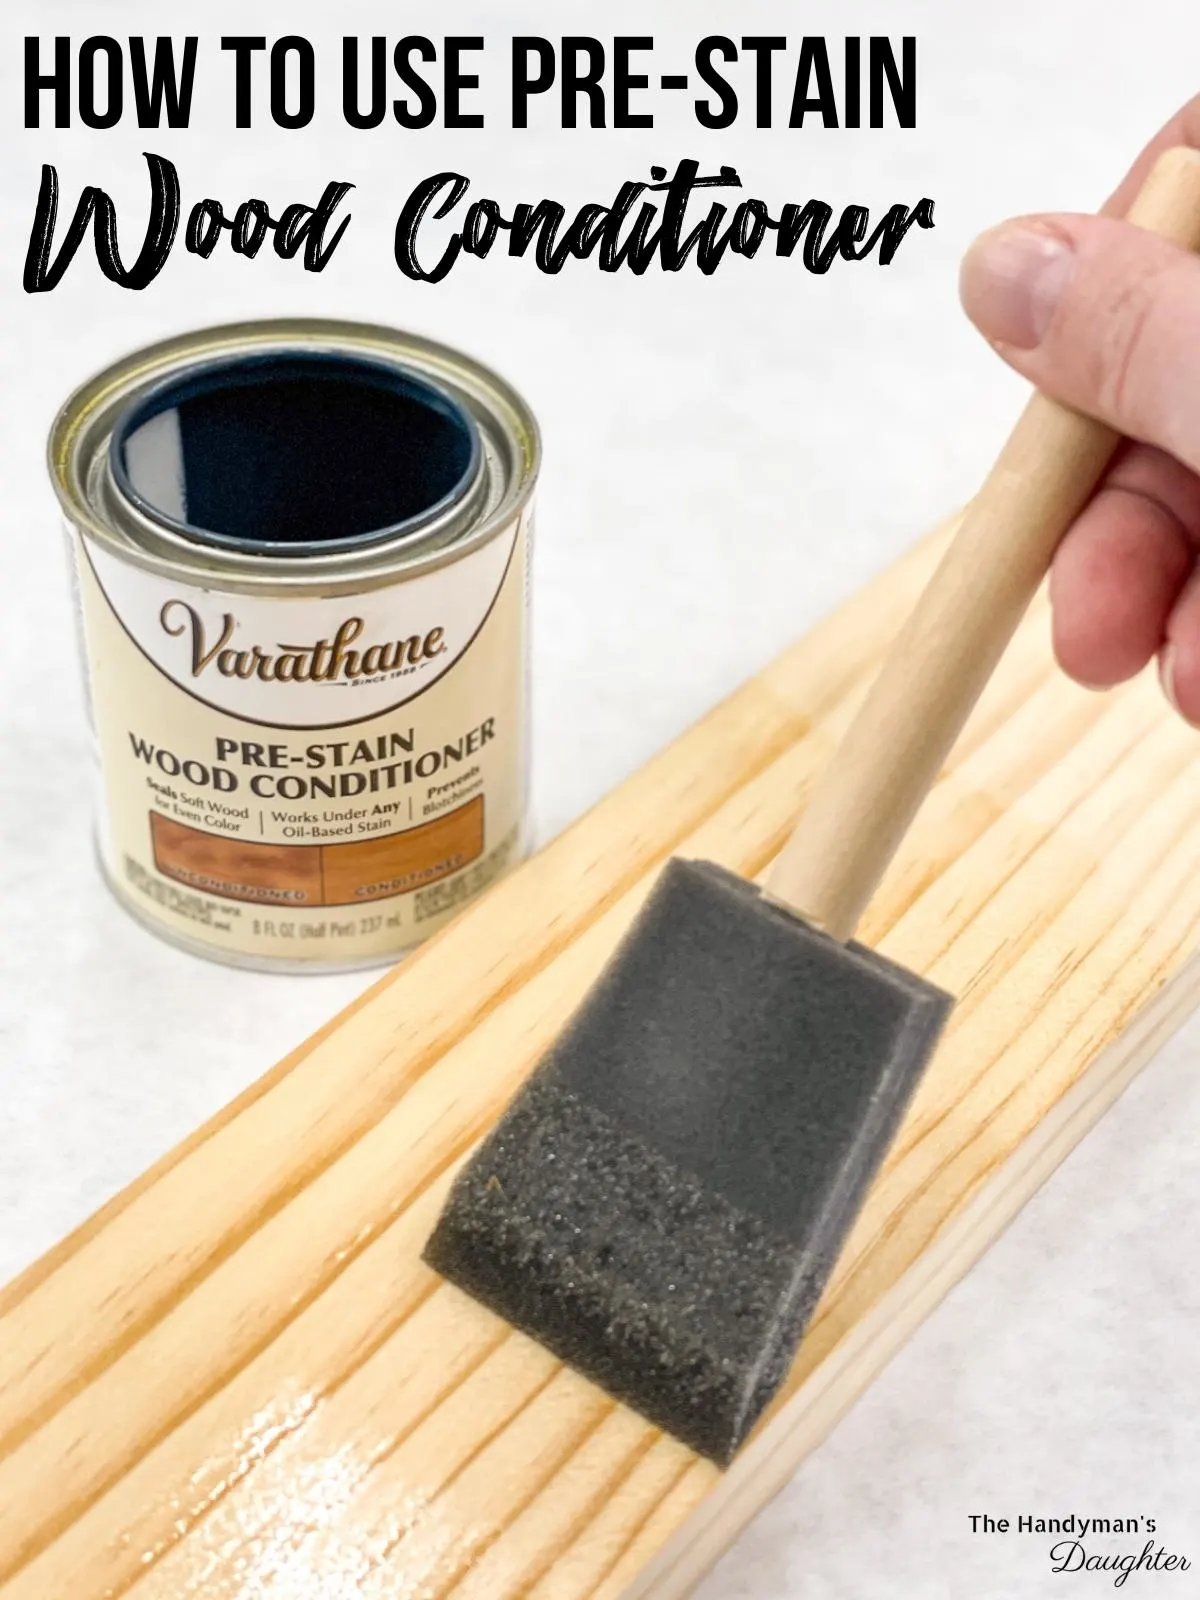 How To Correctly Apply Wood Stain with a Cloth